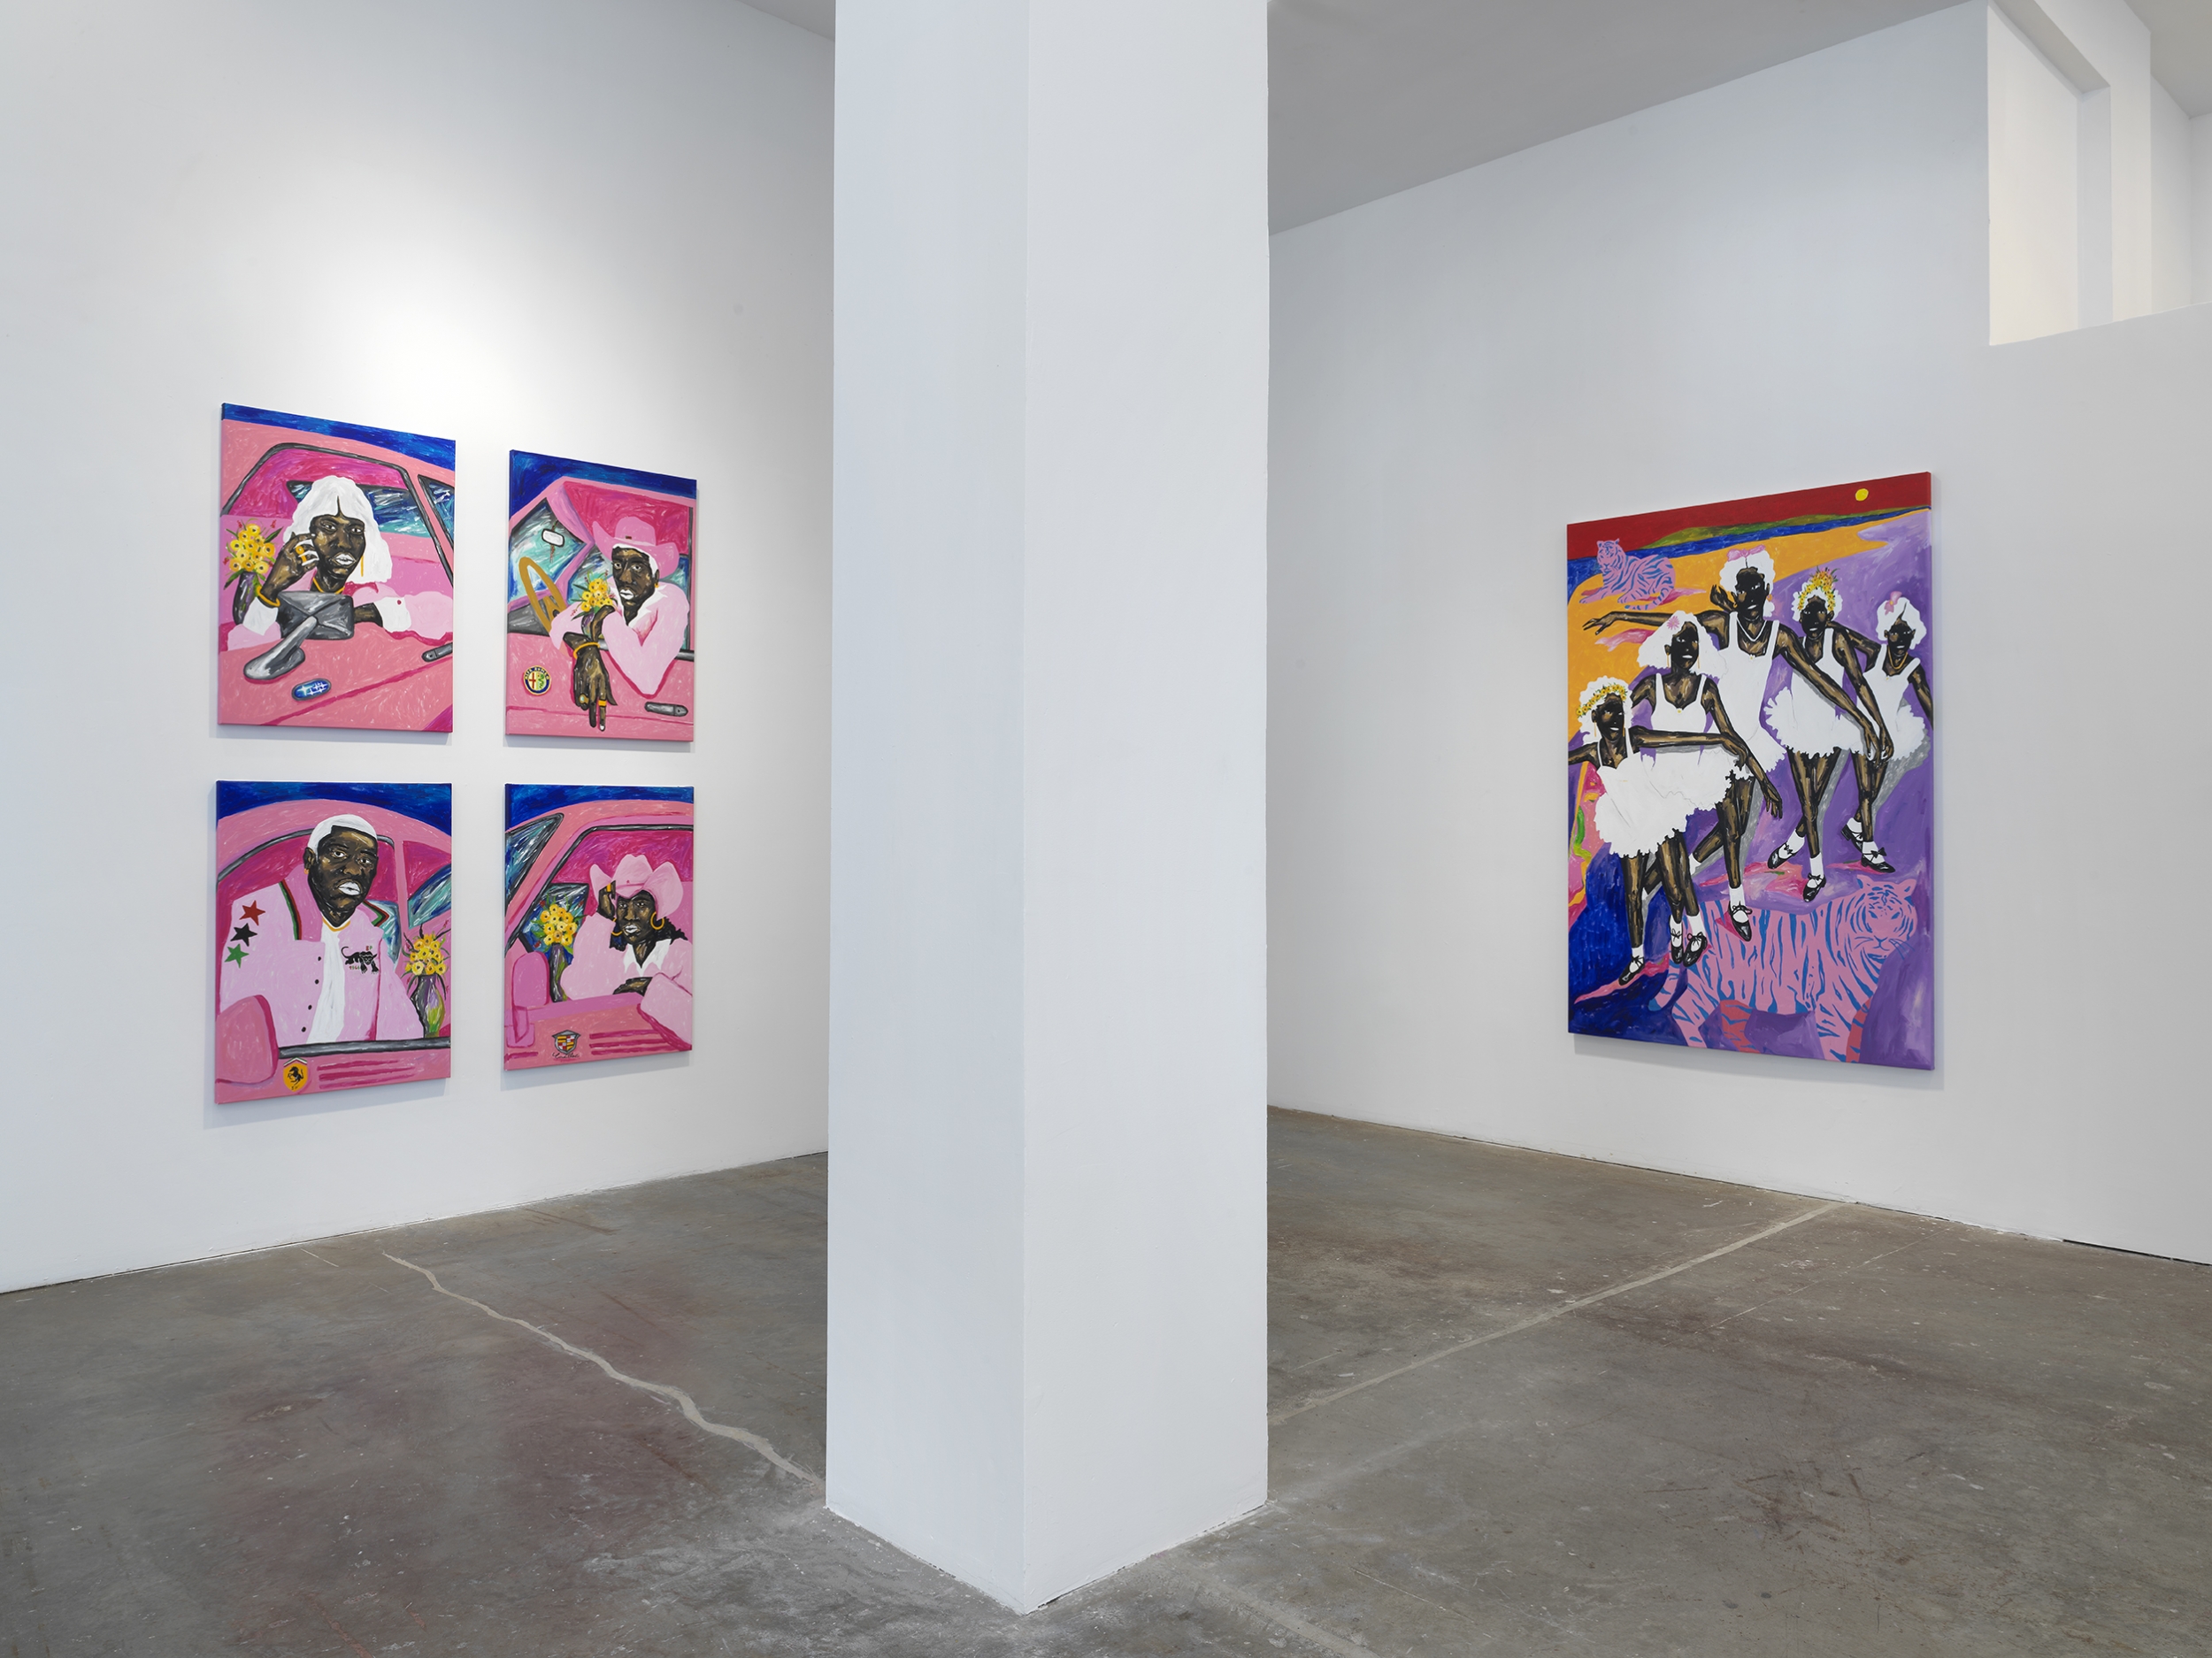 Artista Zéh Palito, Won't You Celebrate With Me, curated by Larry Ossei-Mensah (Luce Gallery, New York, NY) - Zéh Palito, Won't You Celebrate With Me, curated by Larry Ossei-Mensah (Luce Gallery, New York, NY)